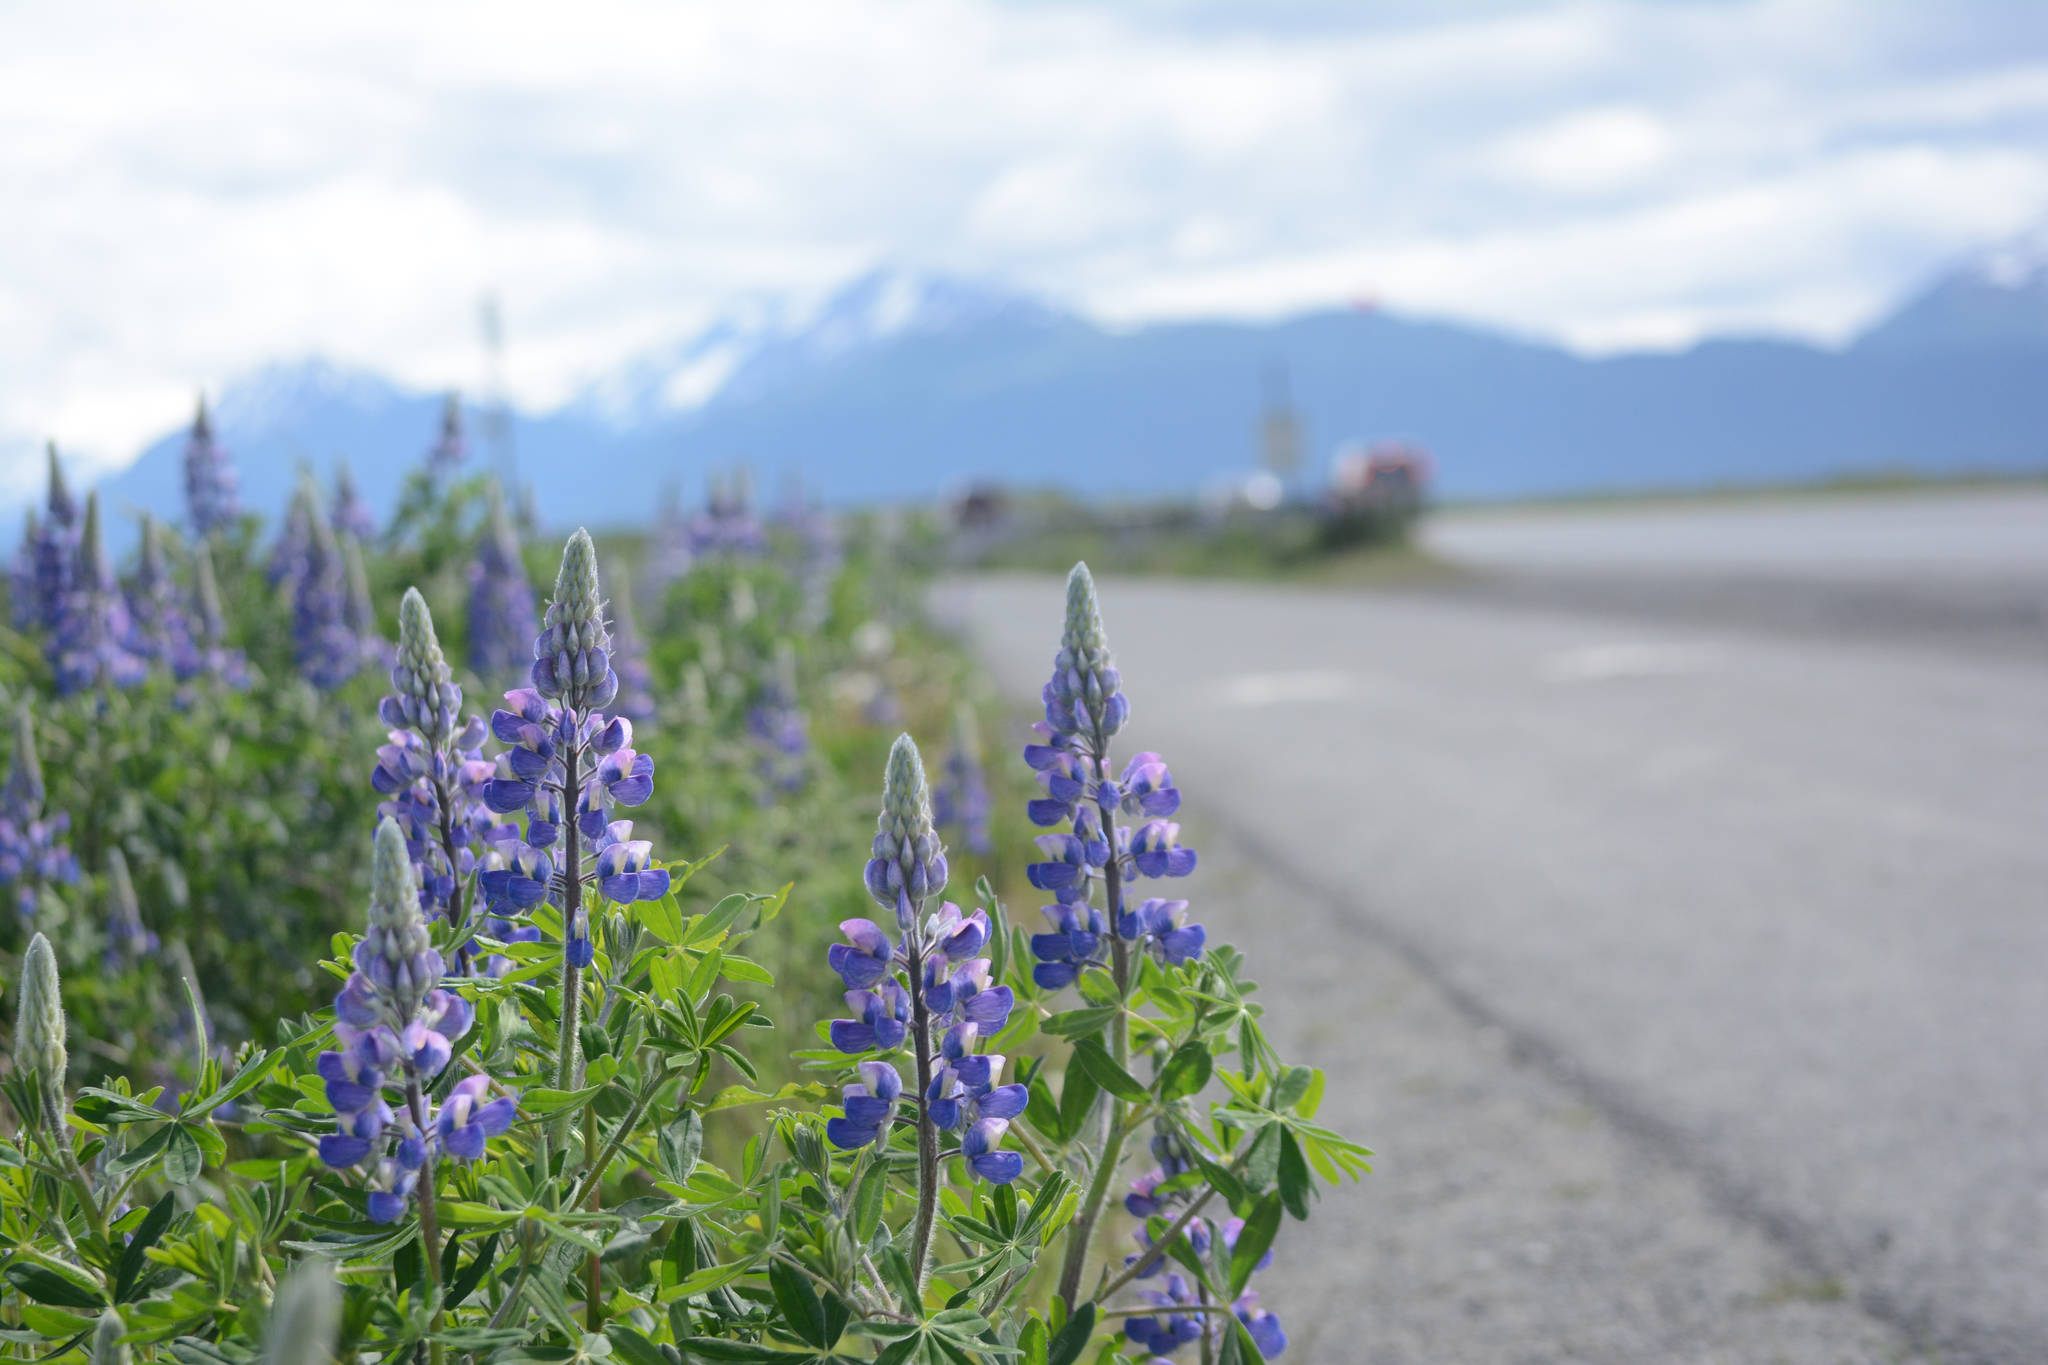 Purple haze Lupines bloom along the Homer Spit Trail on Tuesday, June 19. Lupines usually bloom in late June on the Spit, bringing a burst of color to the trail running from Kachemak Drive to Coal Point at the end of the road. (Photo by Michael Armstrong/Homer News).